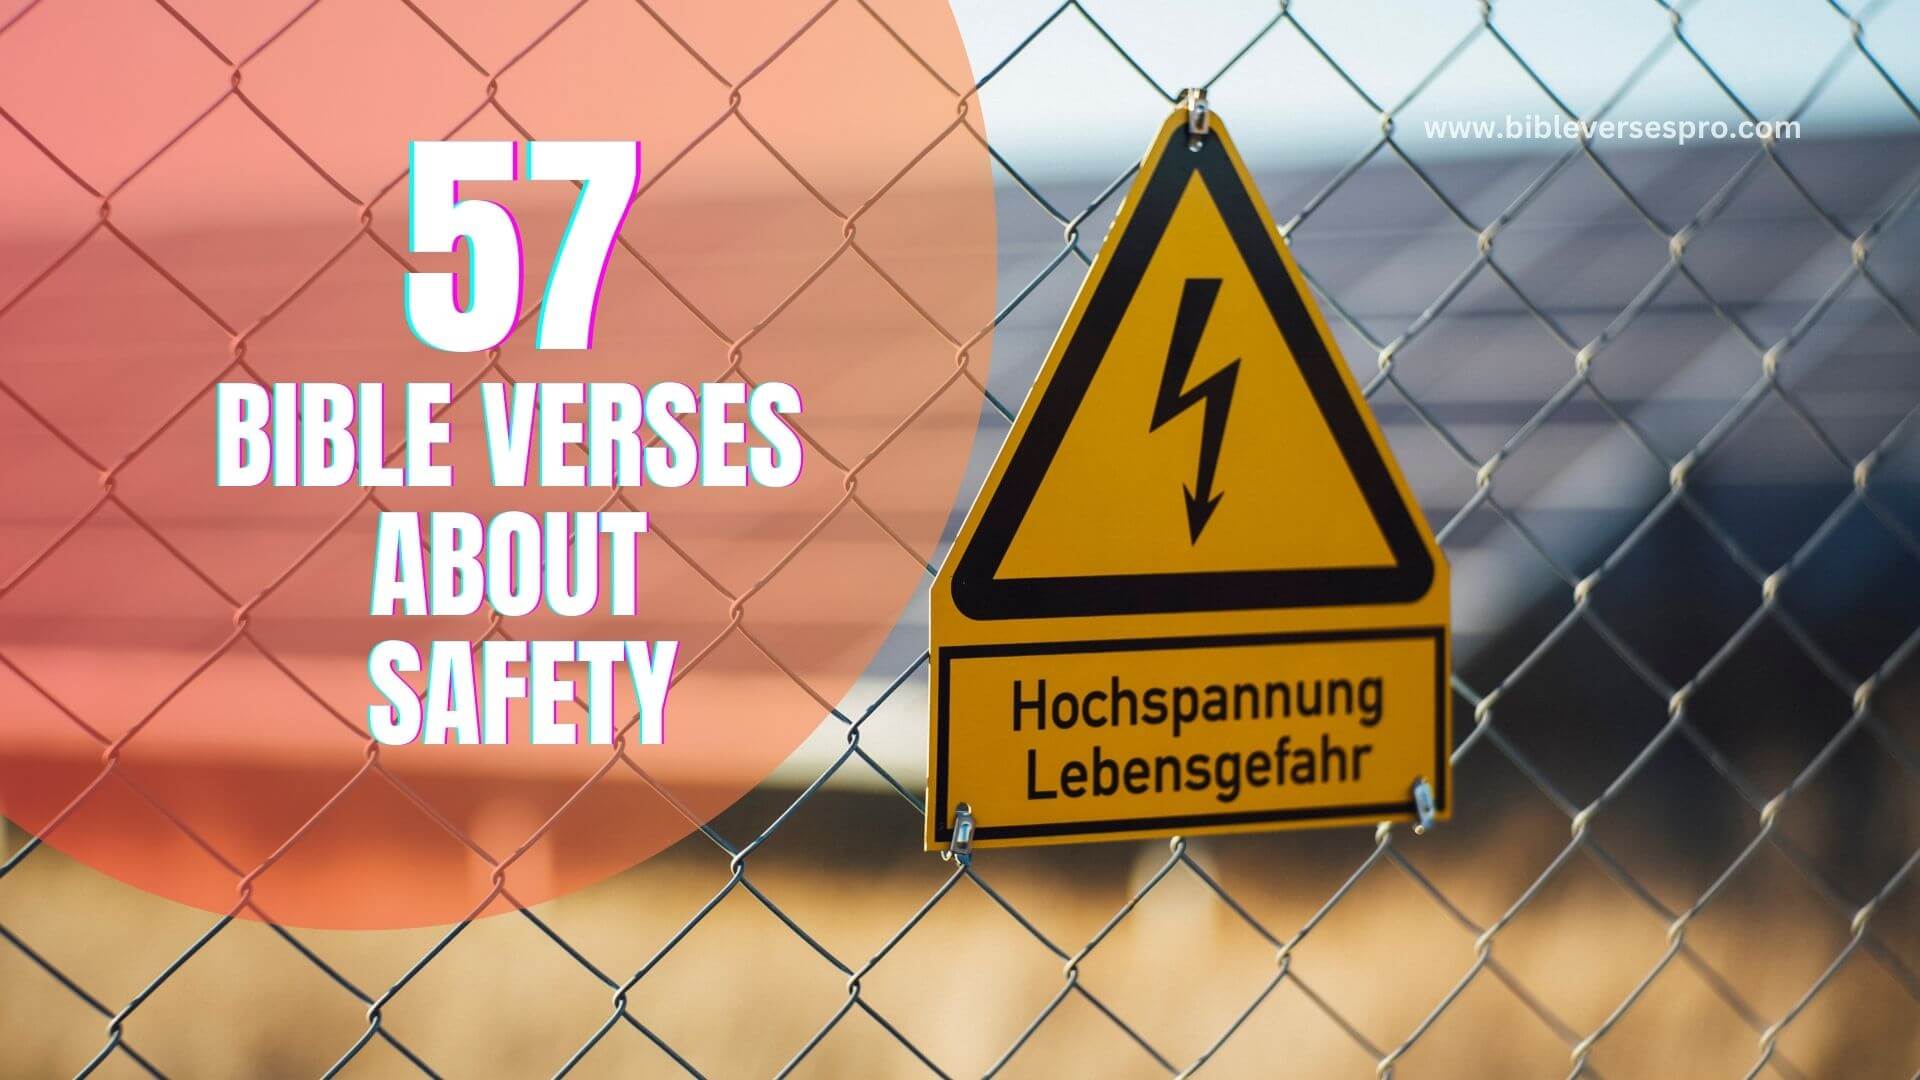 BIBLE VERSES ABOUT SAFETY (1)